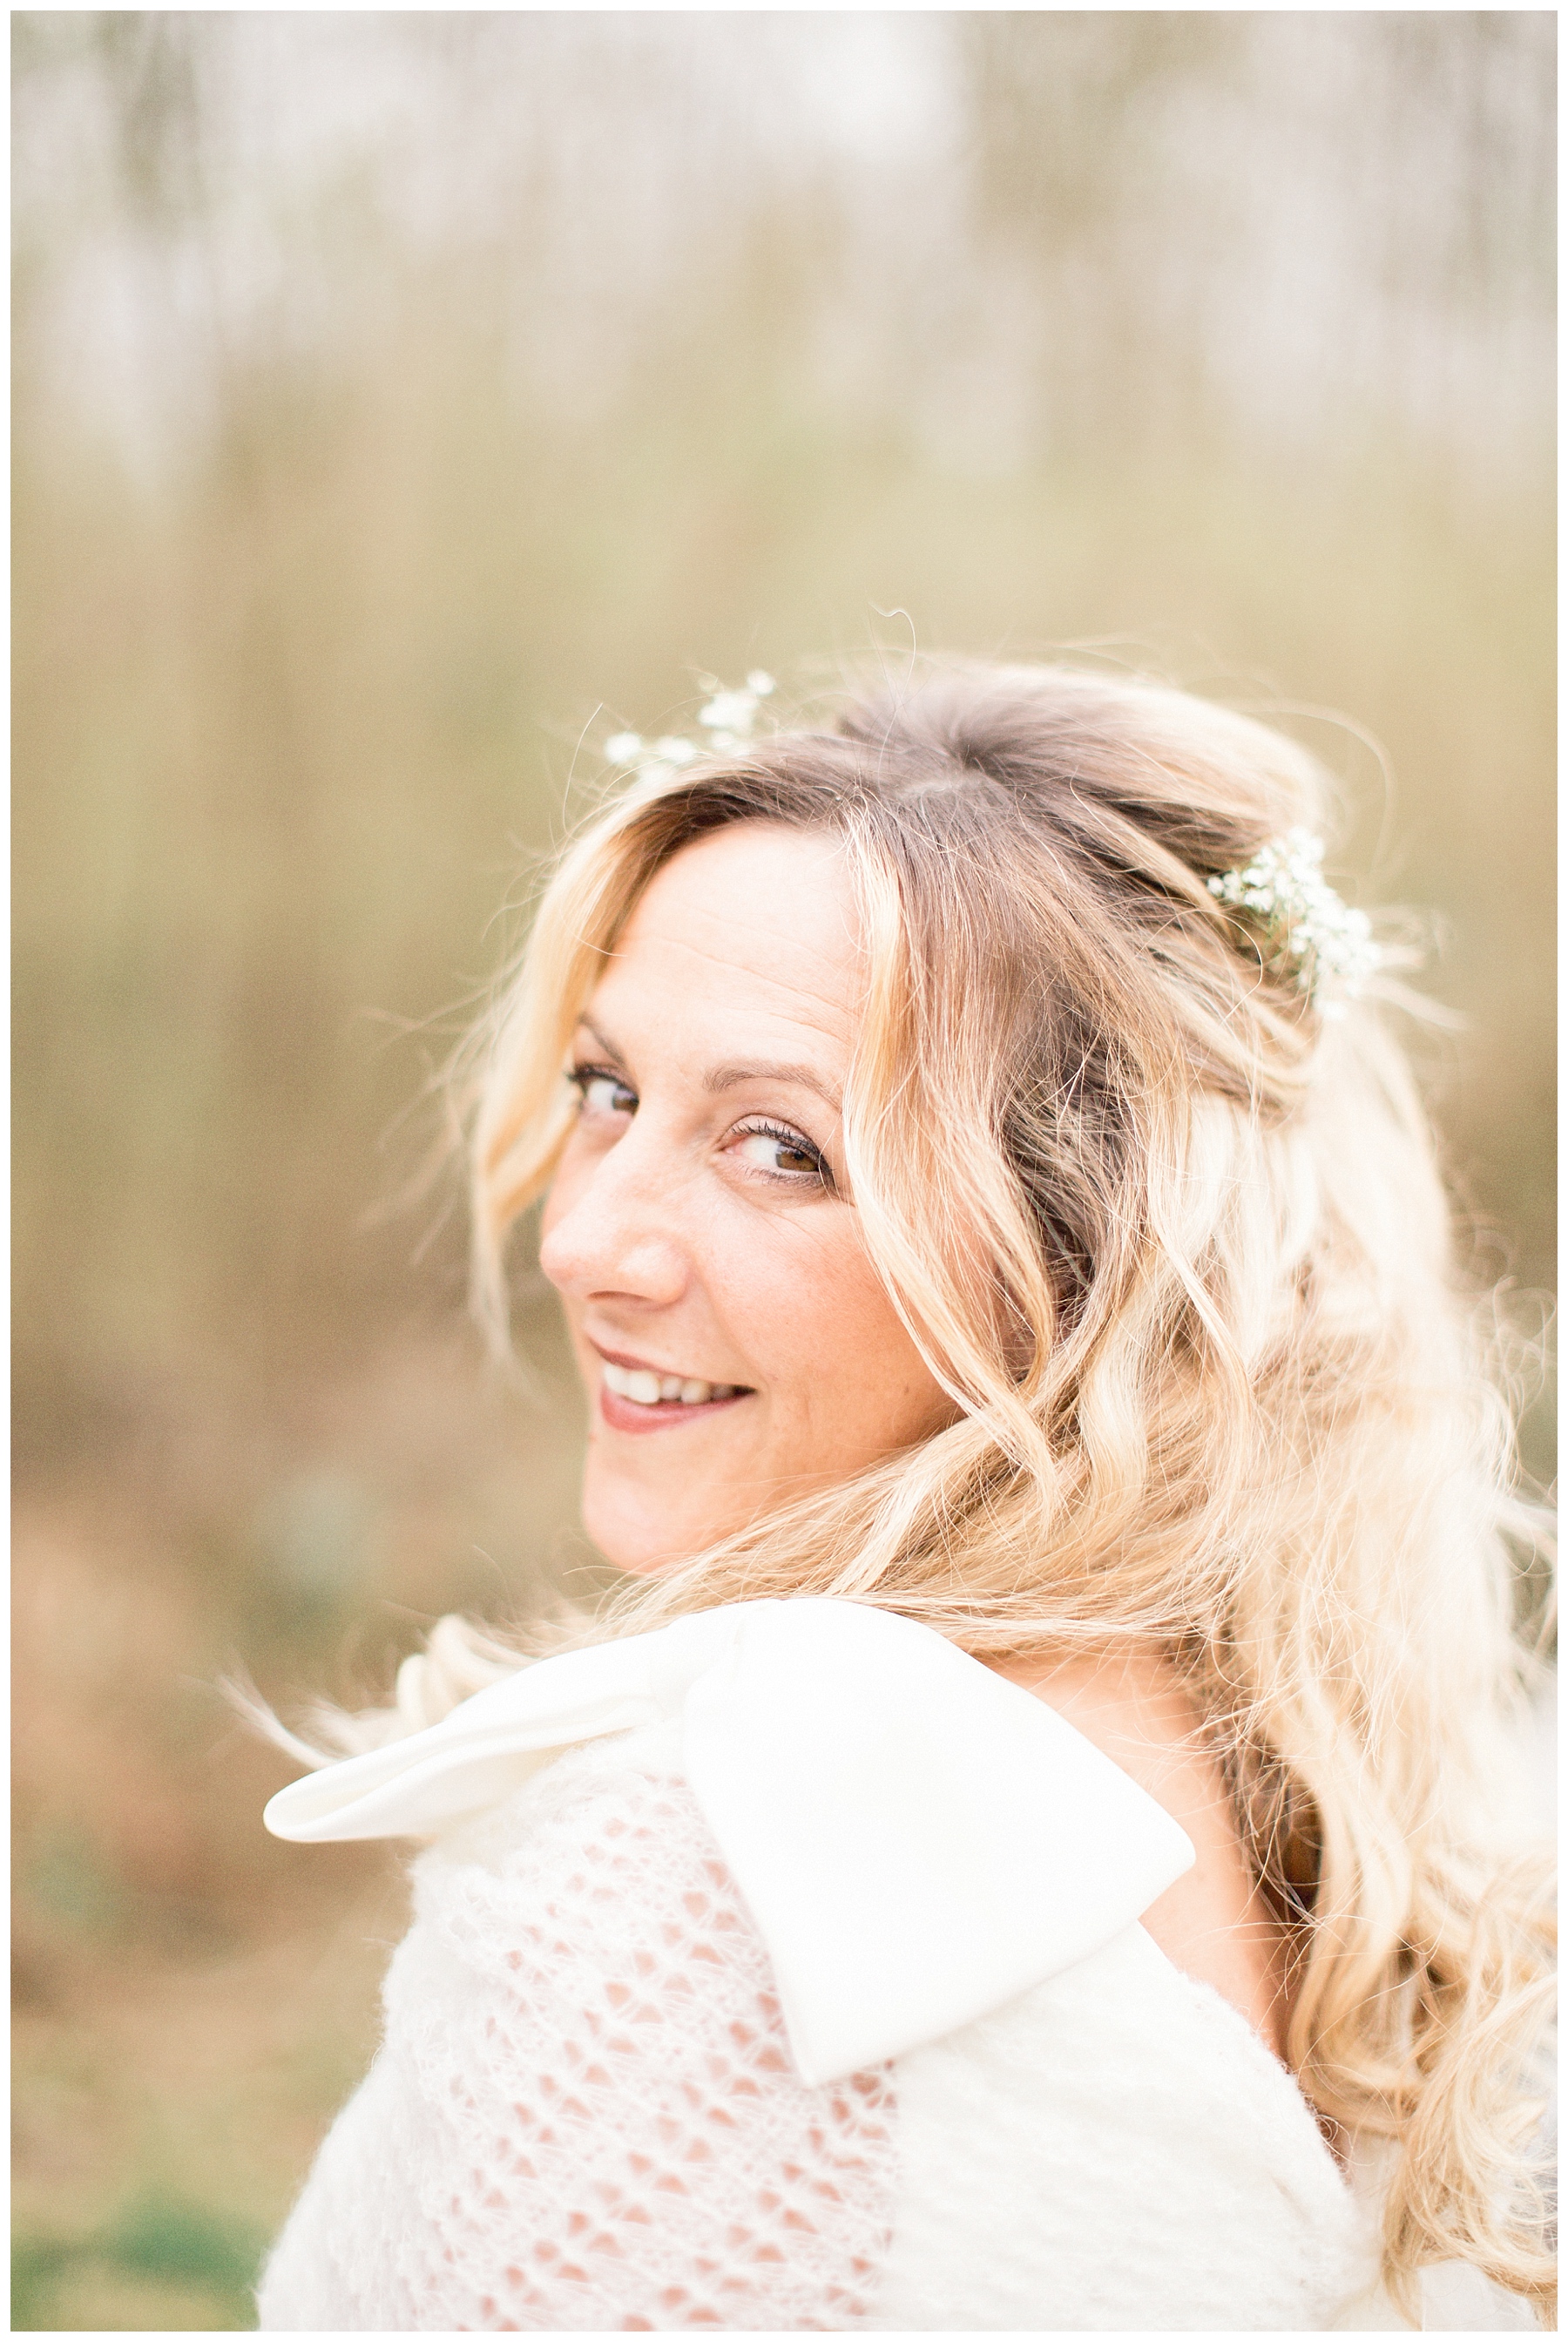 Marie-Alice-G-Photographe-Mariage-France-Normandie-Photographe-Valognes-Cherbourg-Manche-Calvados-Caen-Bayeux-Mariage-Lille